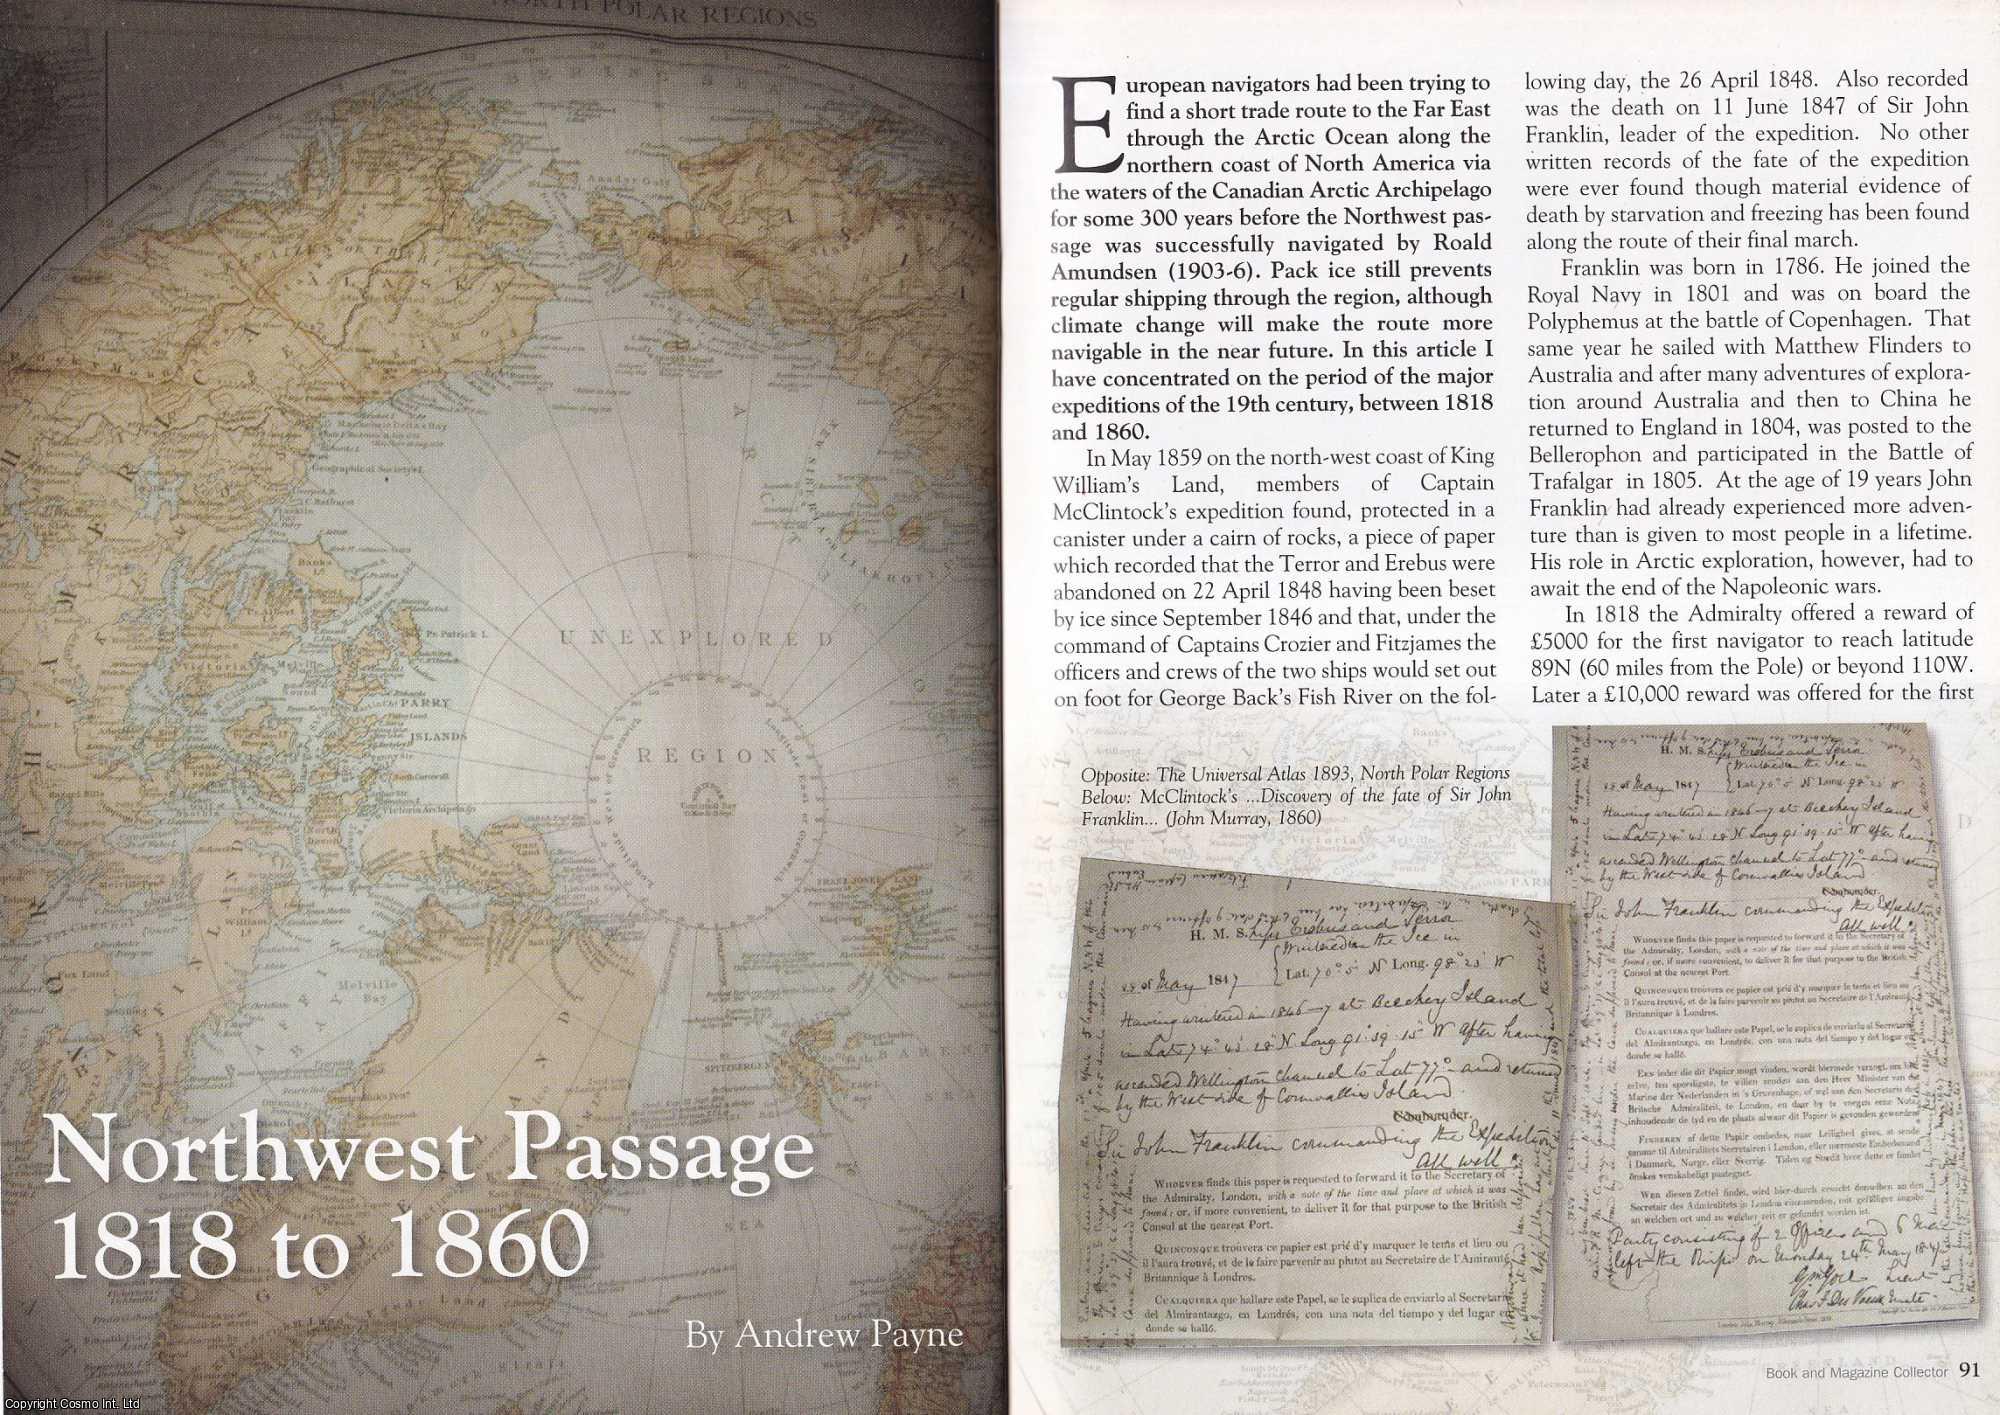 Andrew Payne - Northwest Passage 1818 to 1860. This is an original article separated from an issue of The Book & Magazine Collector publication.